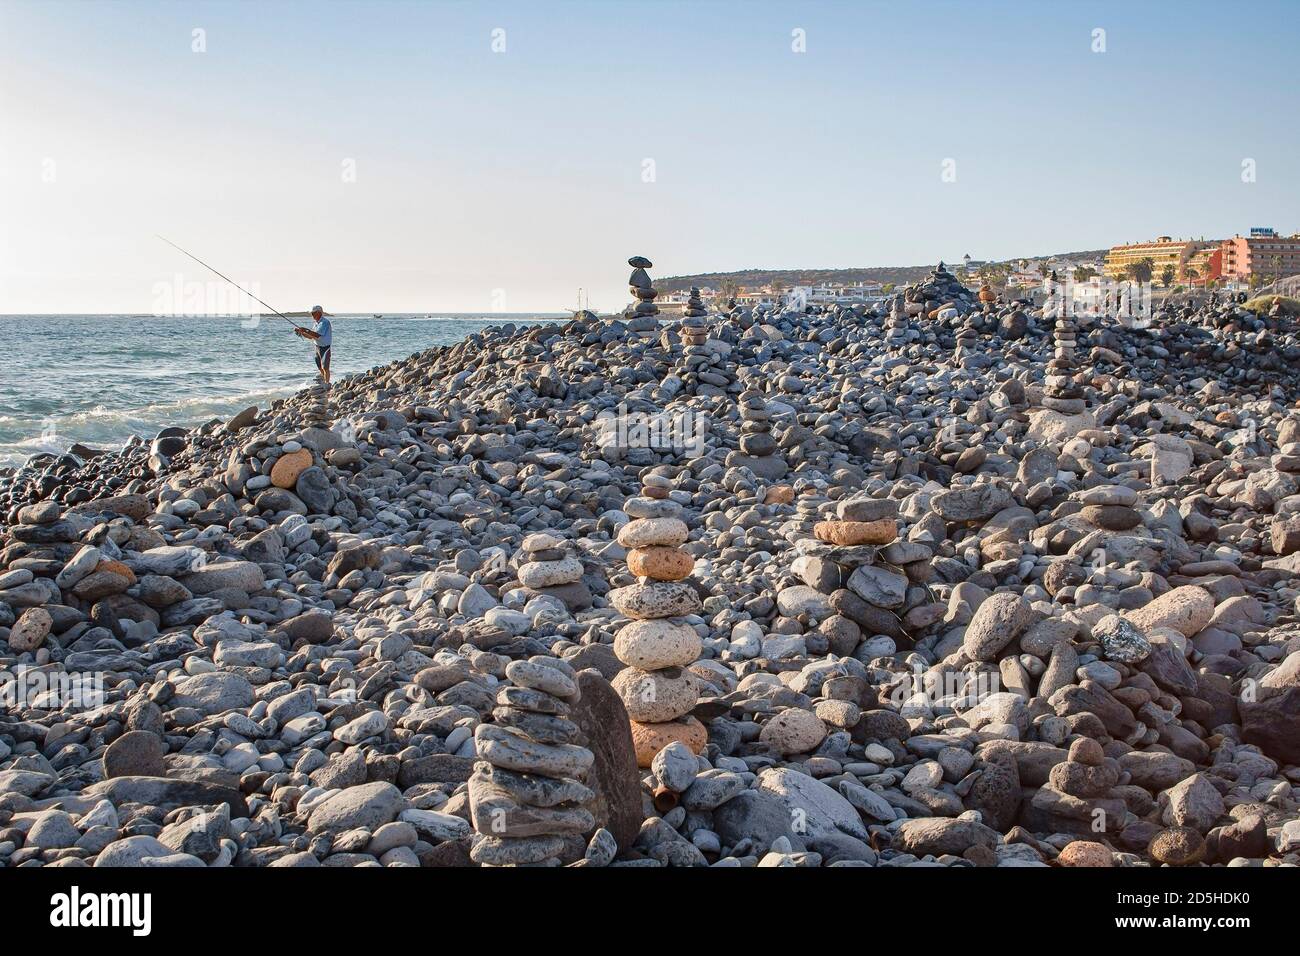 TENERIFE, SPAIN - March 14, 2015. Piles of stones stacked on a beach in Costa Adeje, Tenerife, Canary Islands Stock Photo